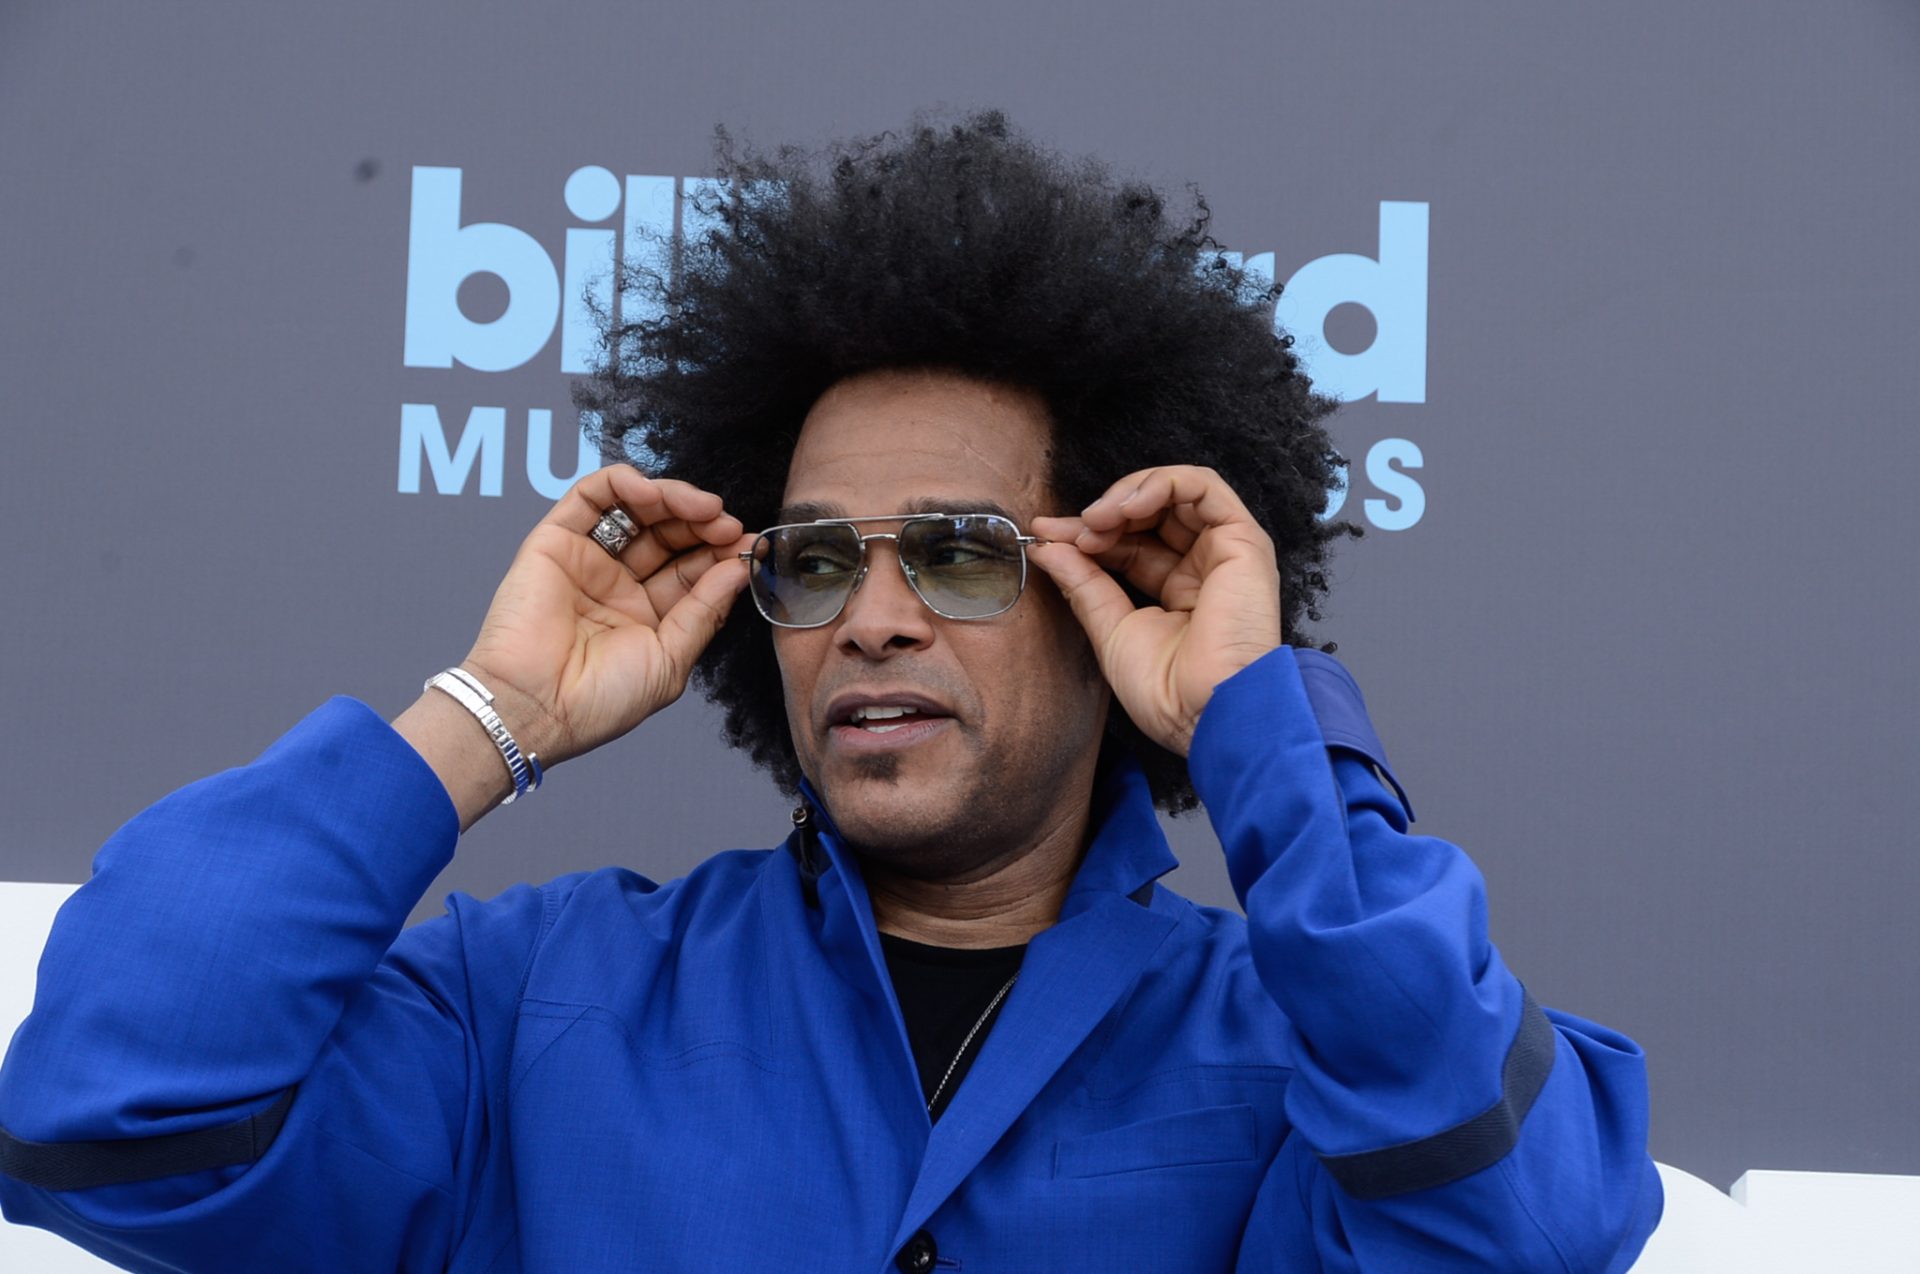 Maxwell Claps Back At People Clowning His Viral Dance: "Your Knees Ain't Built Like That"